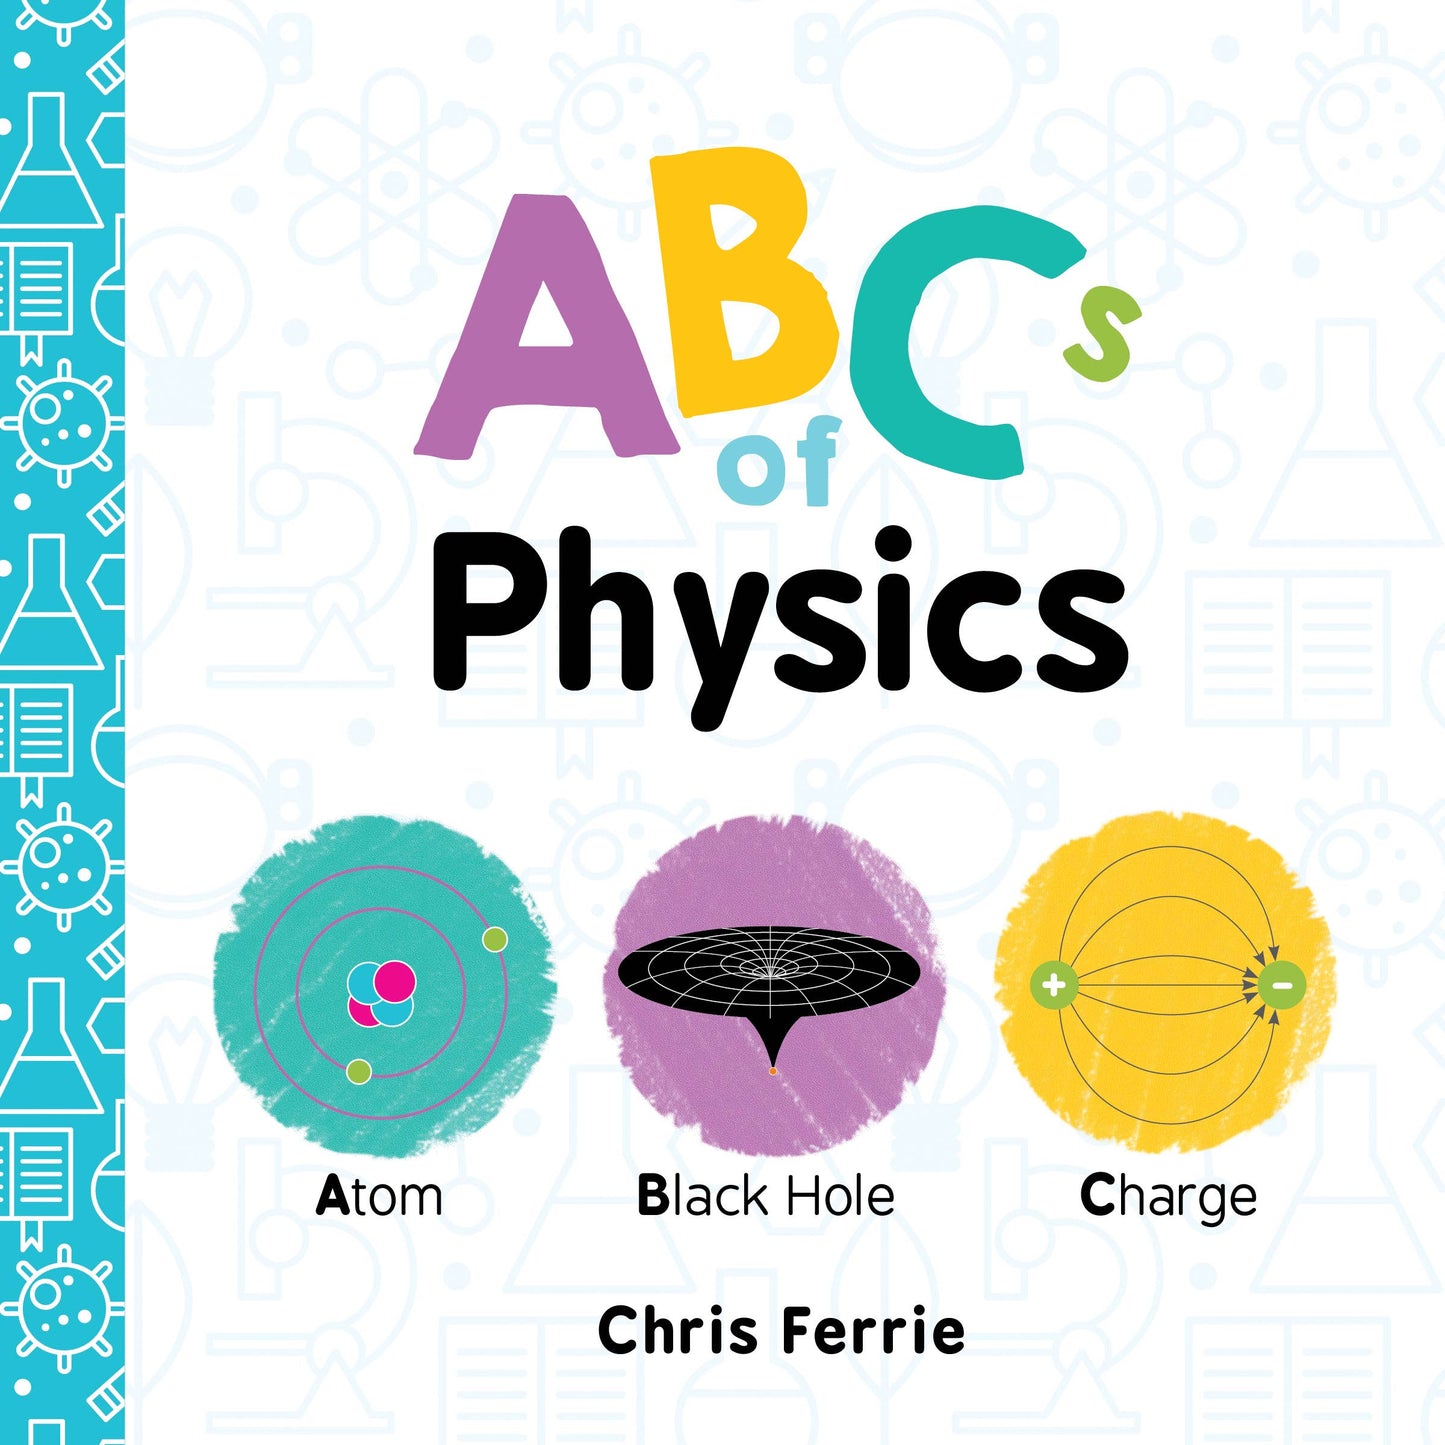 ABCs of Physics: Baby University Series by Chris Ferrie (Board Book)